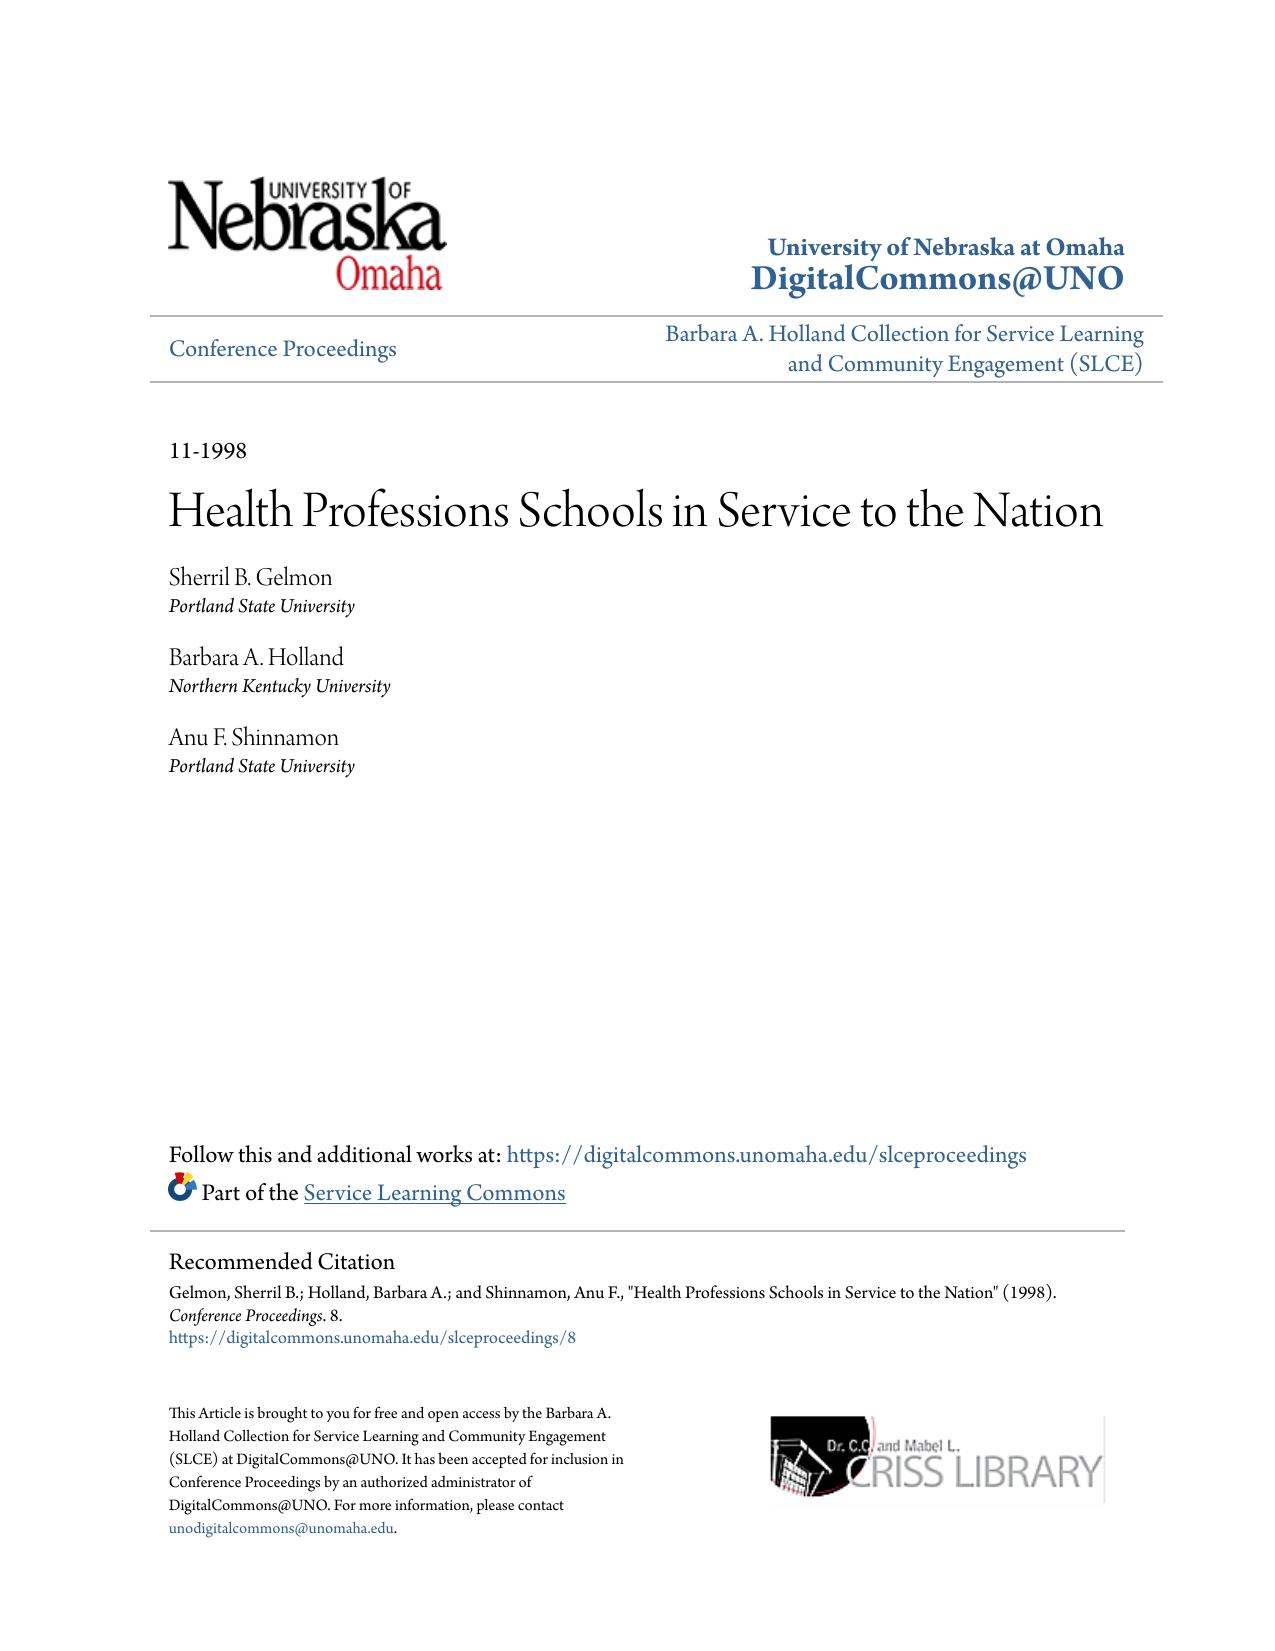 Health Professions Schools in Service to the Nation